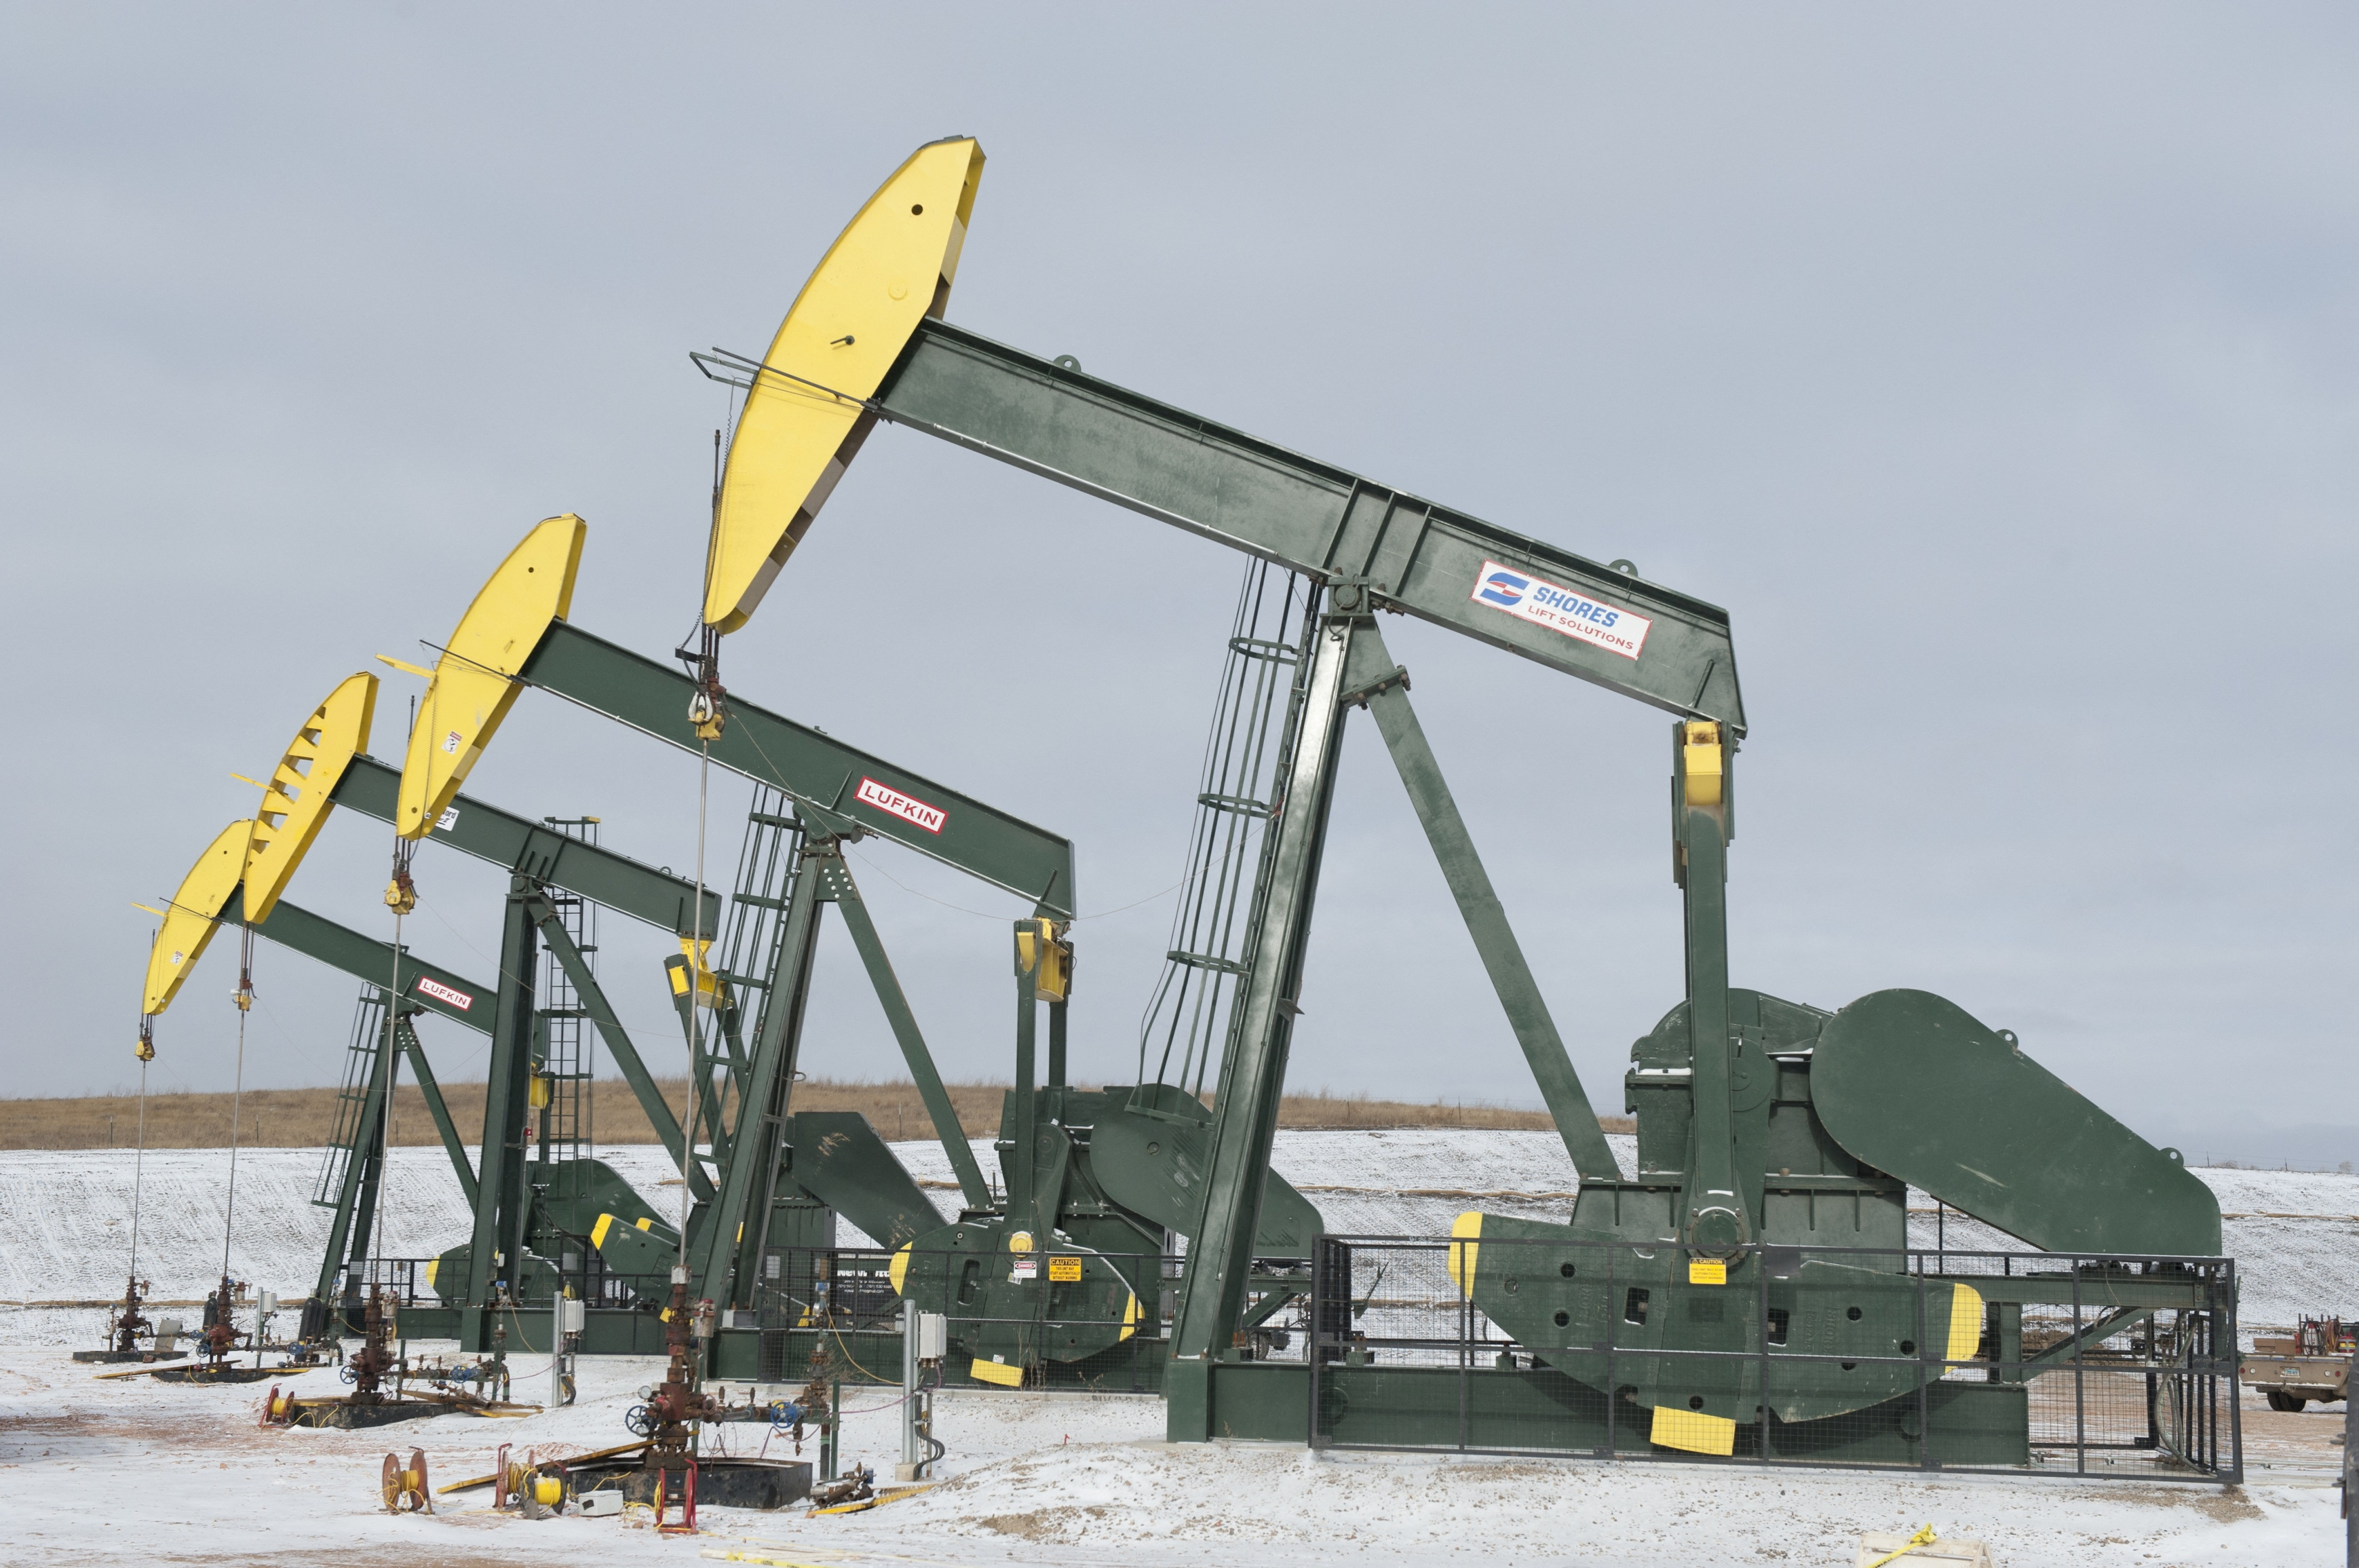 Pumpjacks taken out of production temporarily stand idle at a Hess site while new wells are fracked near Williston